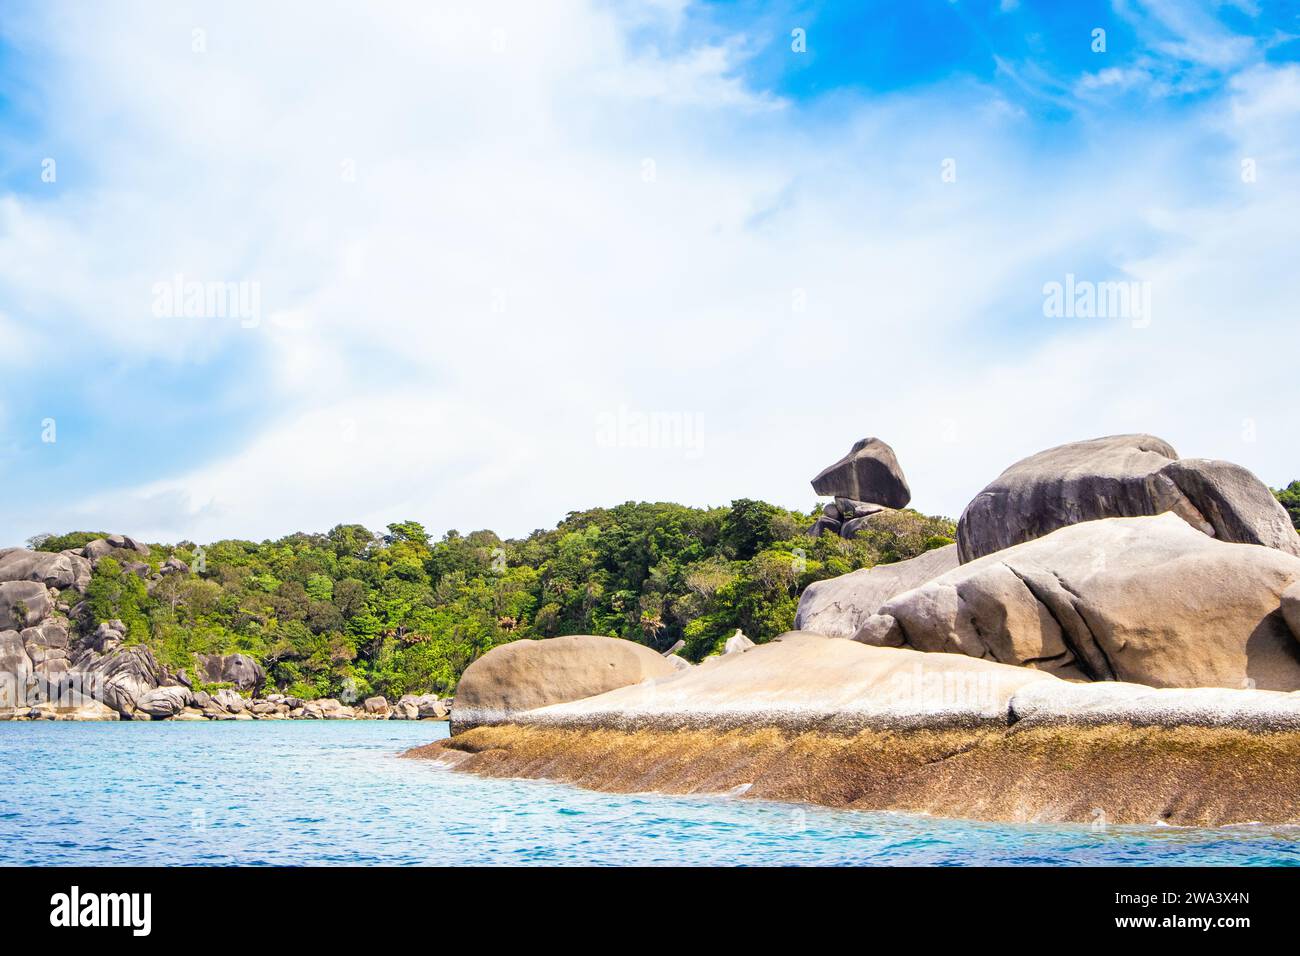 The rocky shore of the Similan Islands in Thailand - most famous islands with paradise views and snorkeling and diving spots Stock Photo